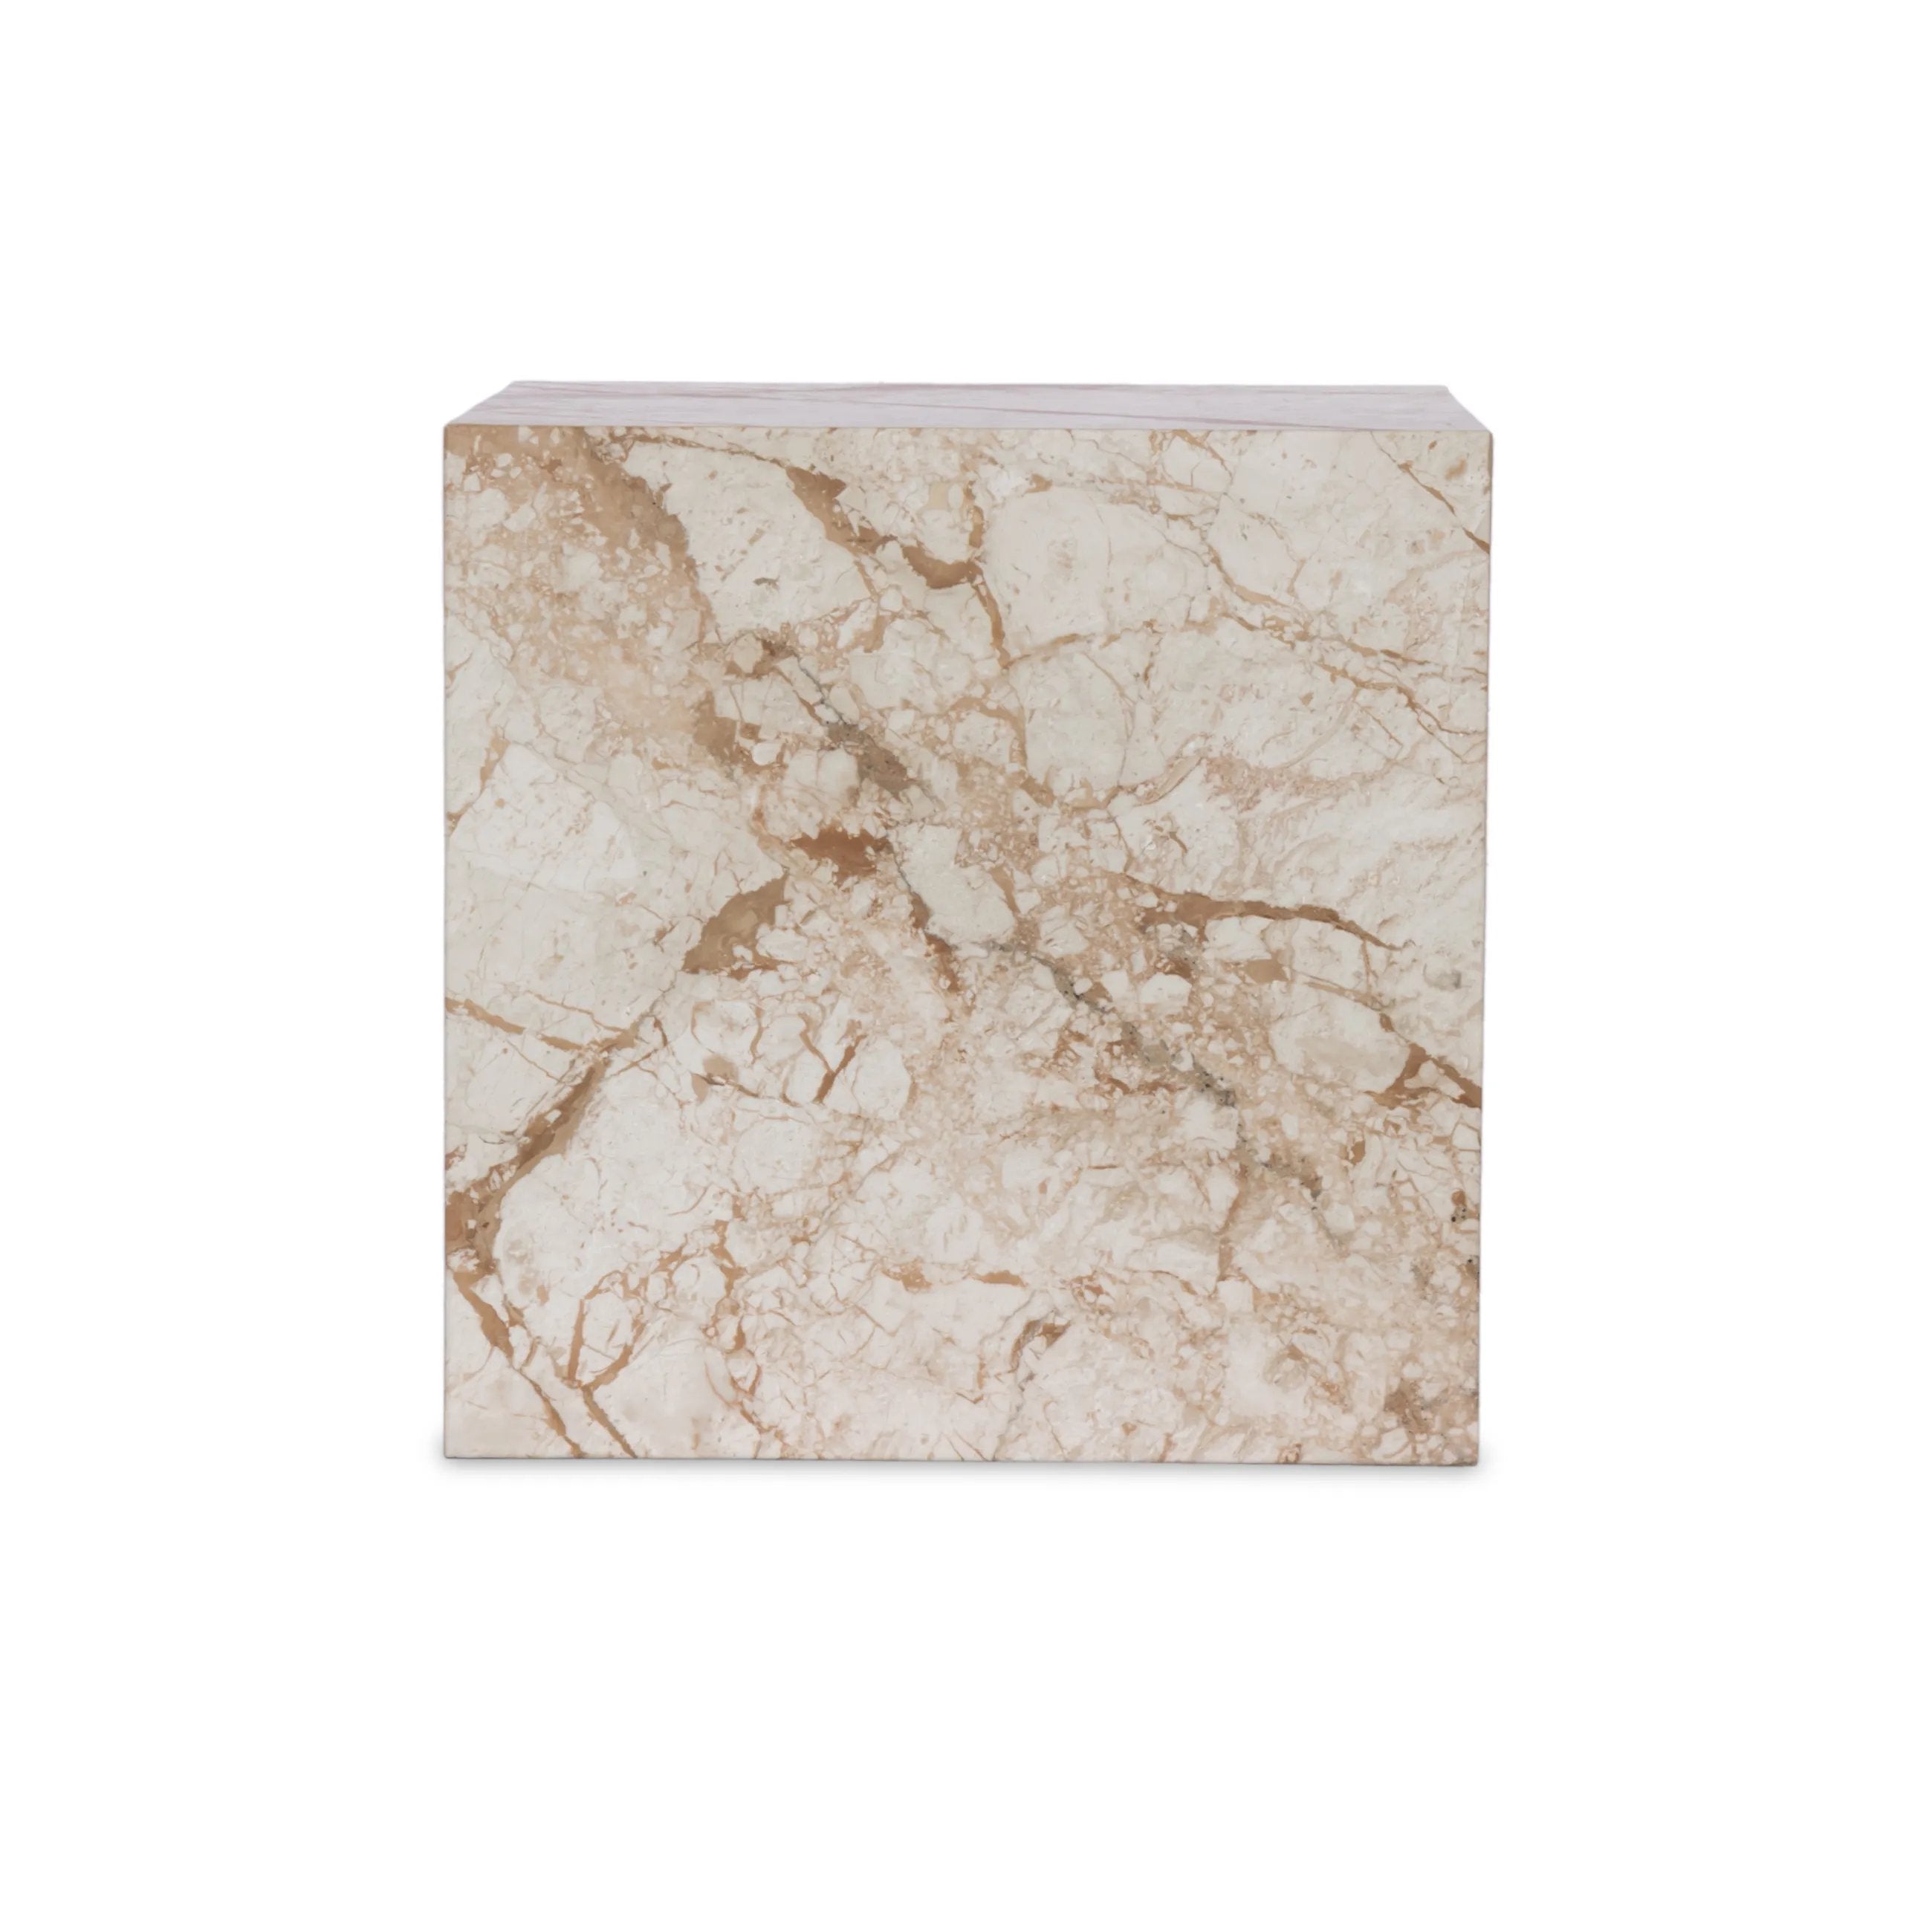 Taupe marble shapes a cubed, plinth-style end table that can be styled just about anywhere.Collection: Elemen Amethyst Home provides interior design, new home construction design consulting, vintage area rugs, and lighting in the Portland metro area.